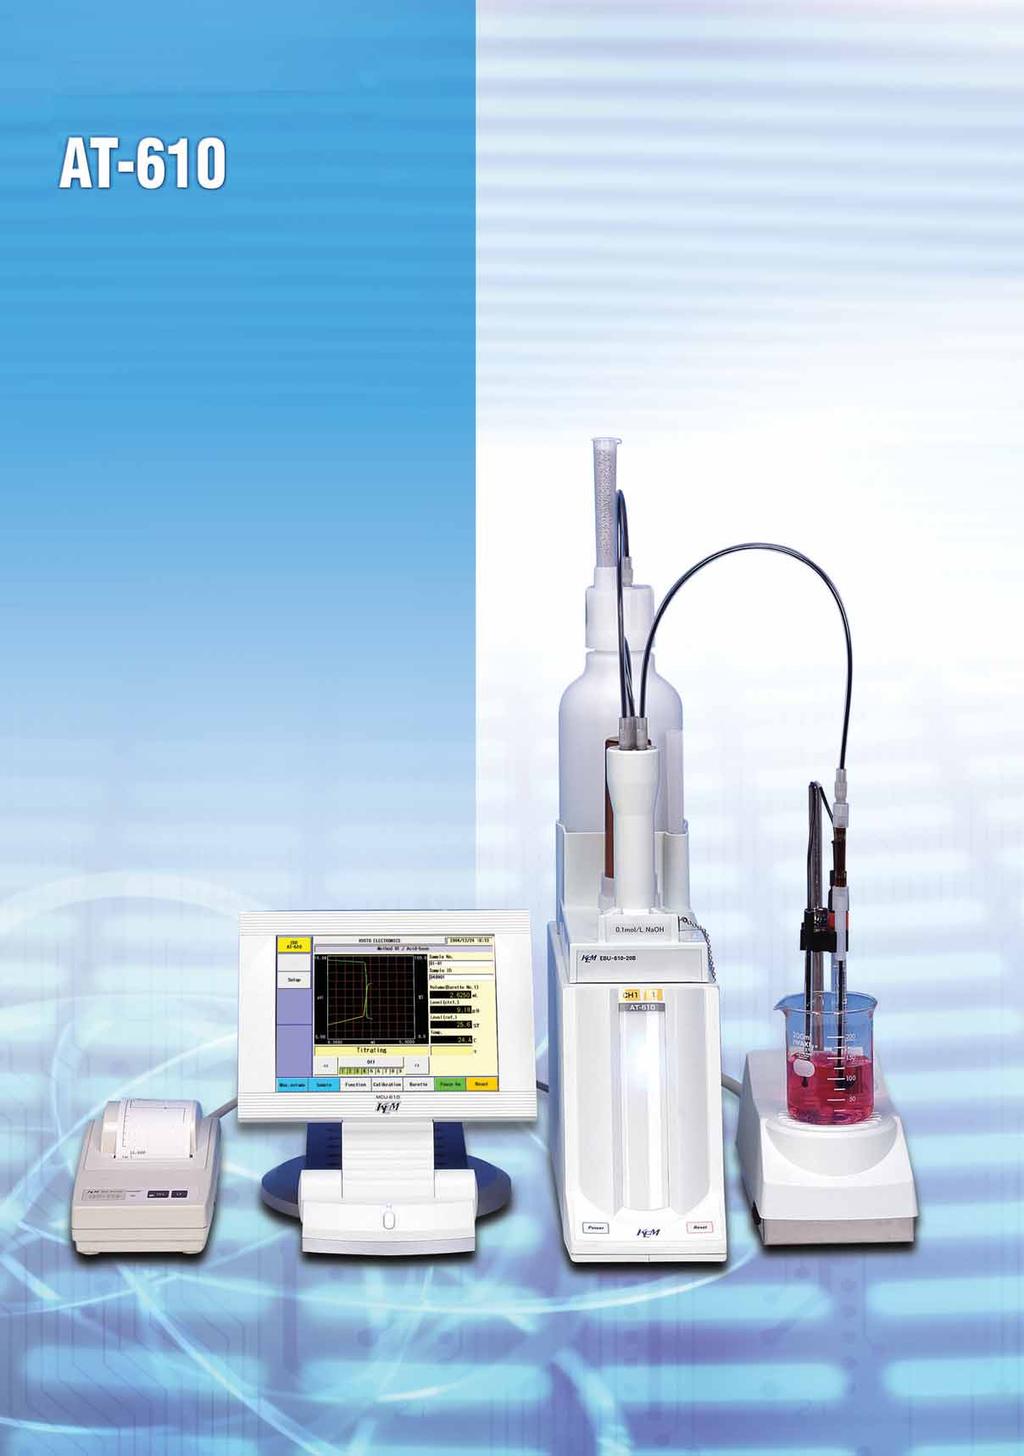 Automatic Potentiometric Titrator Two Different Titrations can be Performed Simultaneously --- Allow for Space-saving. Also, a Karl Fischer Moisture Titrator can be combined.